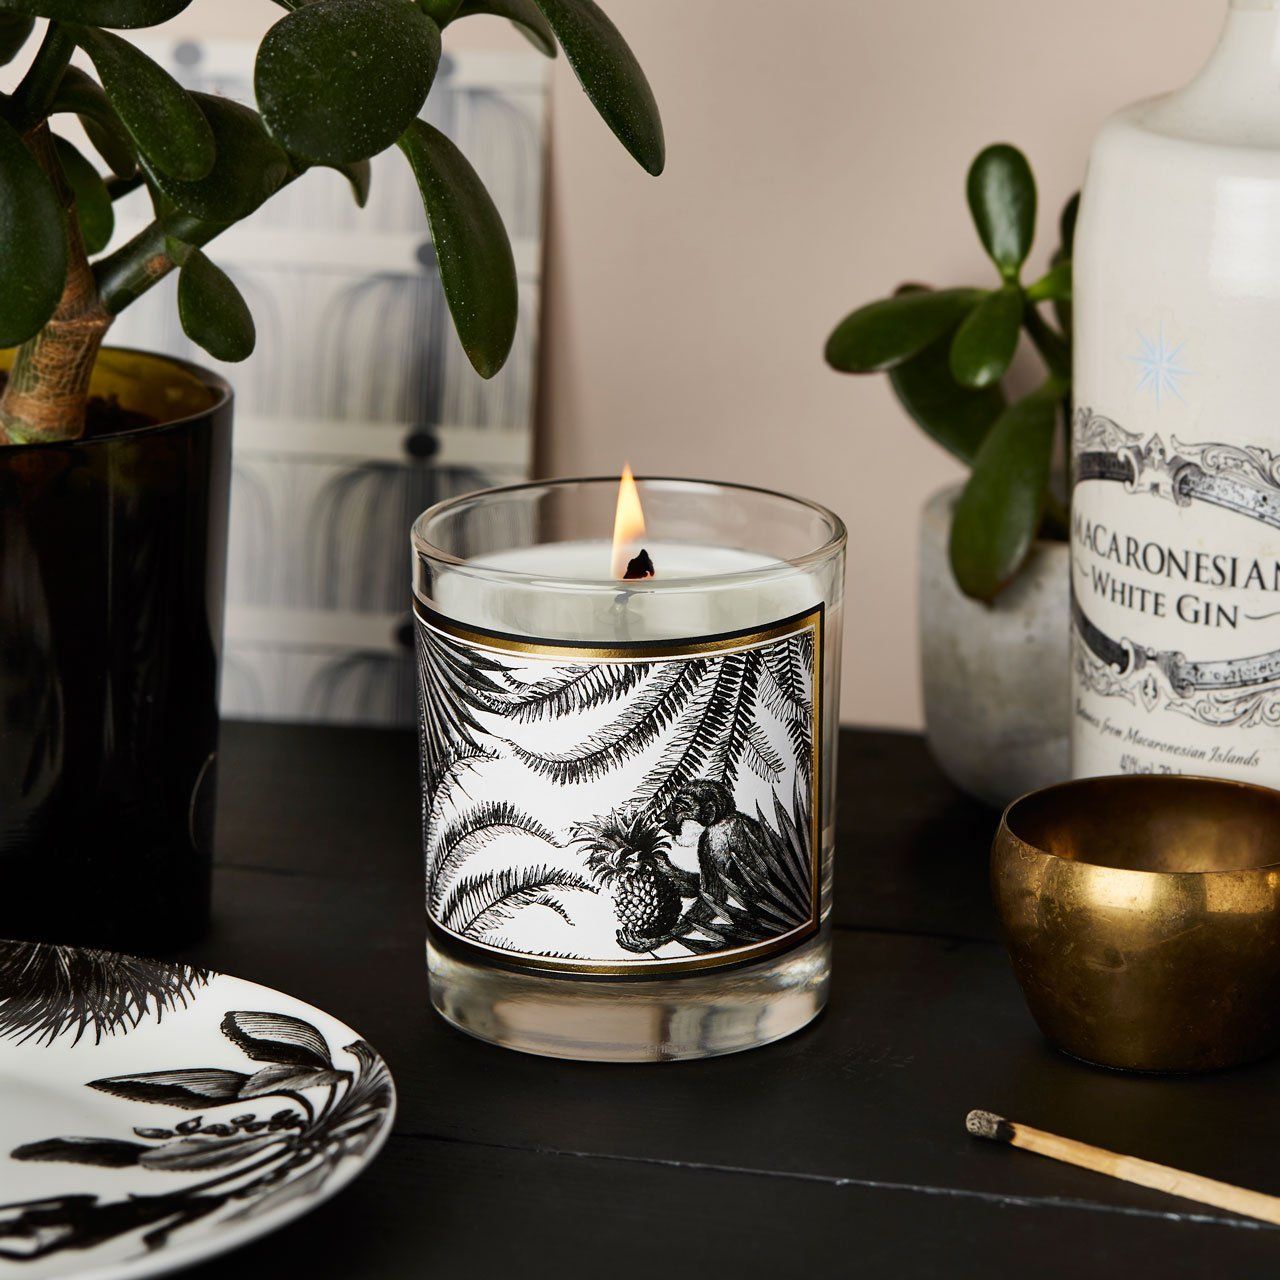 The Tropical Paradise Glass Candle - Chase and Wonder - Proudly Made in Britain